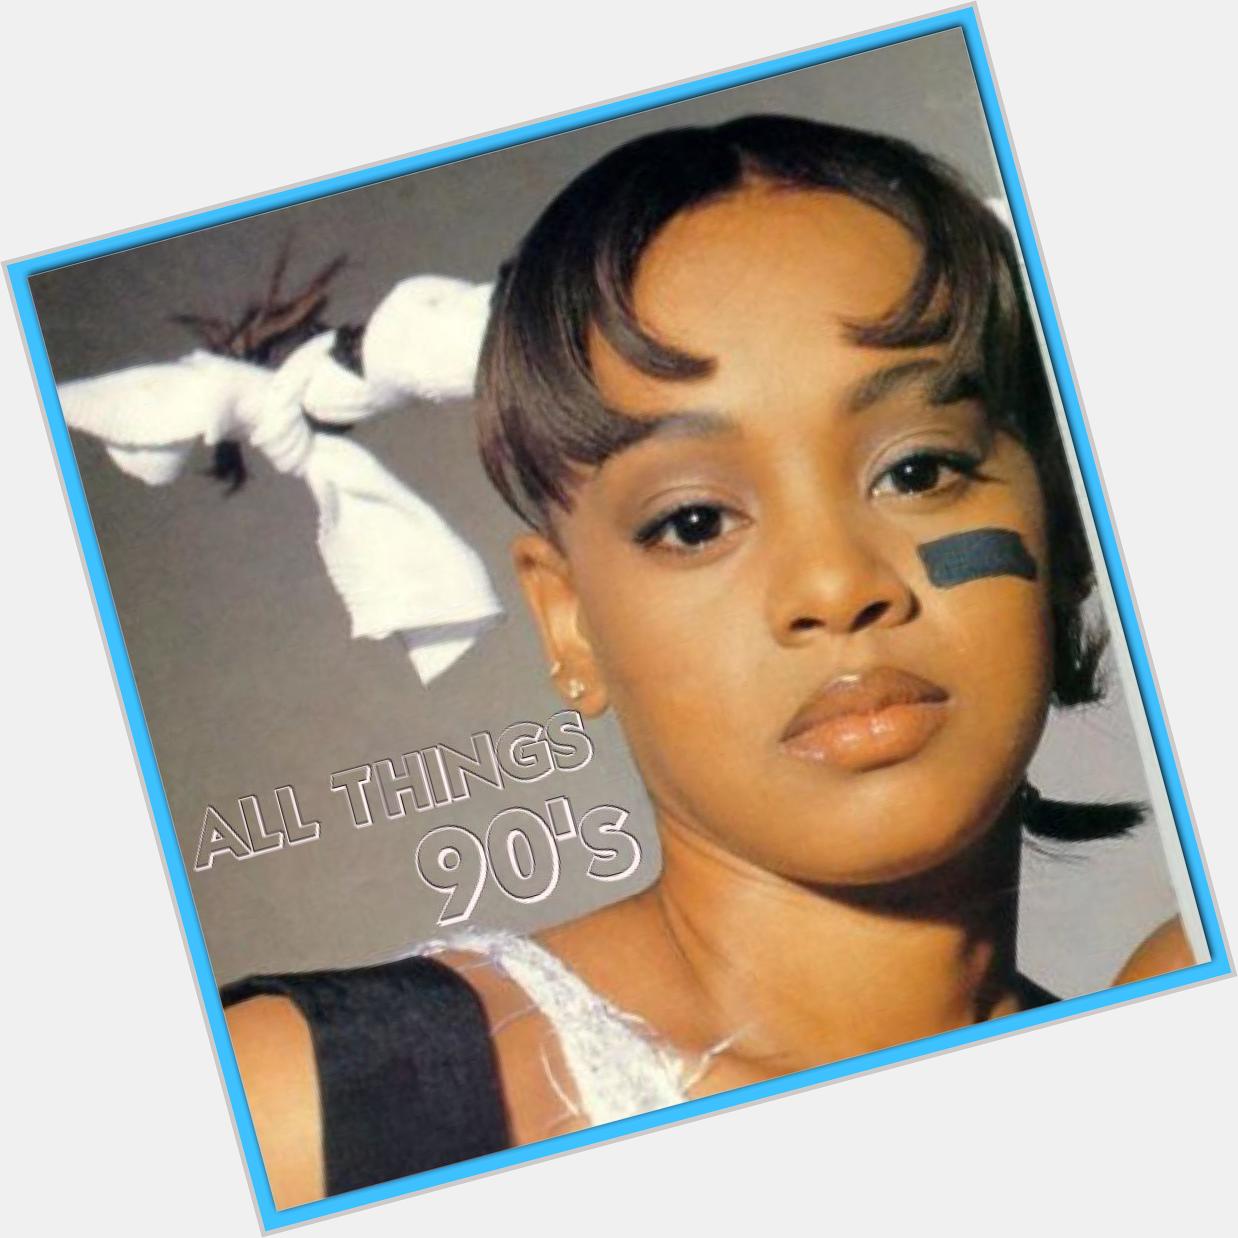 Happy Birthday Lisa \Left Eye\ Lopes who would\ve been 44 today. RIP     